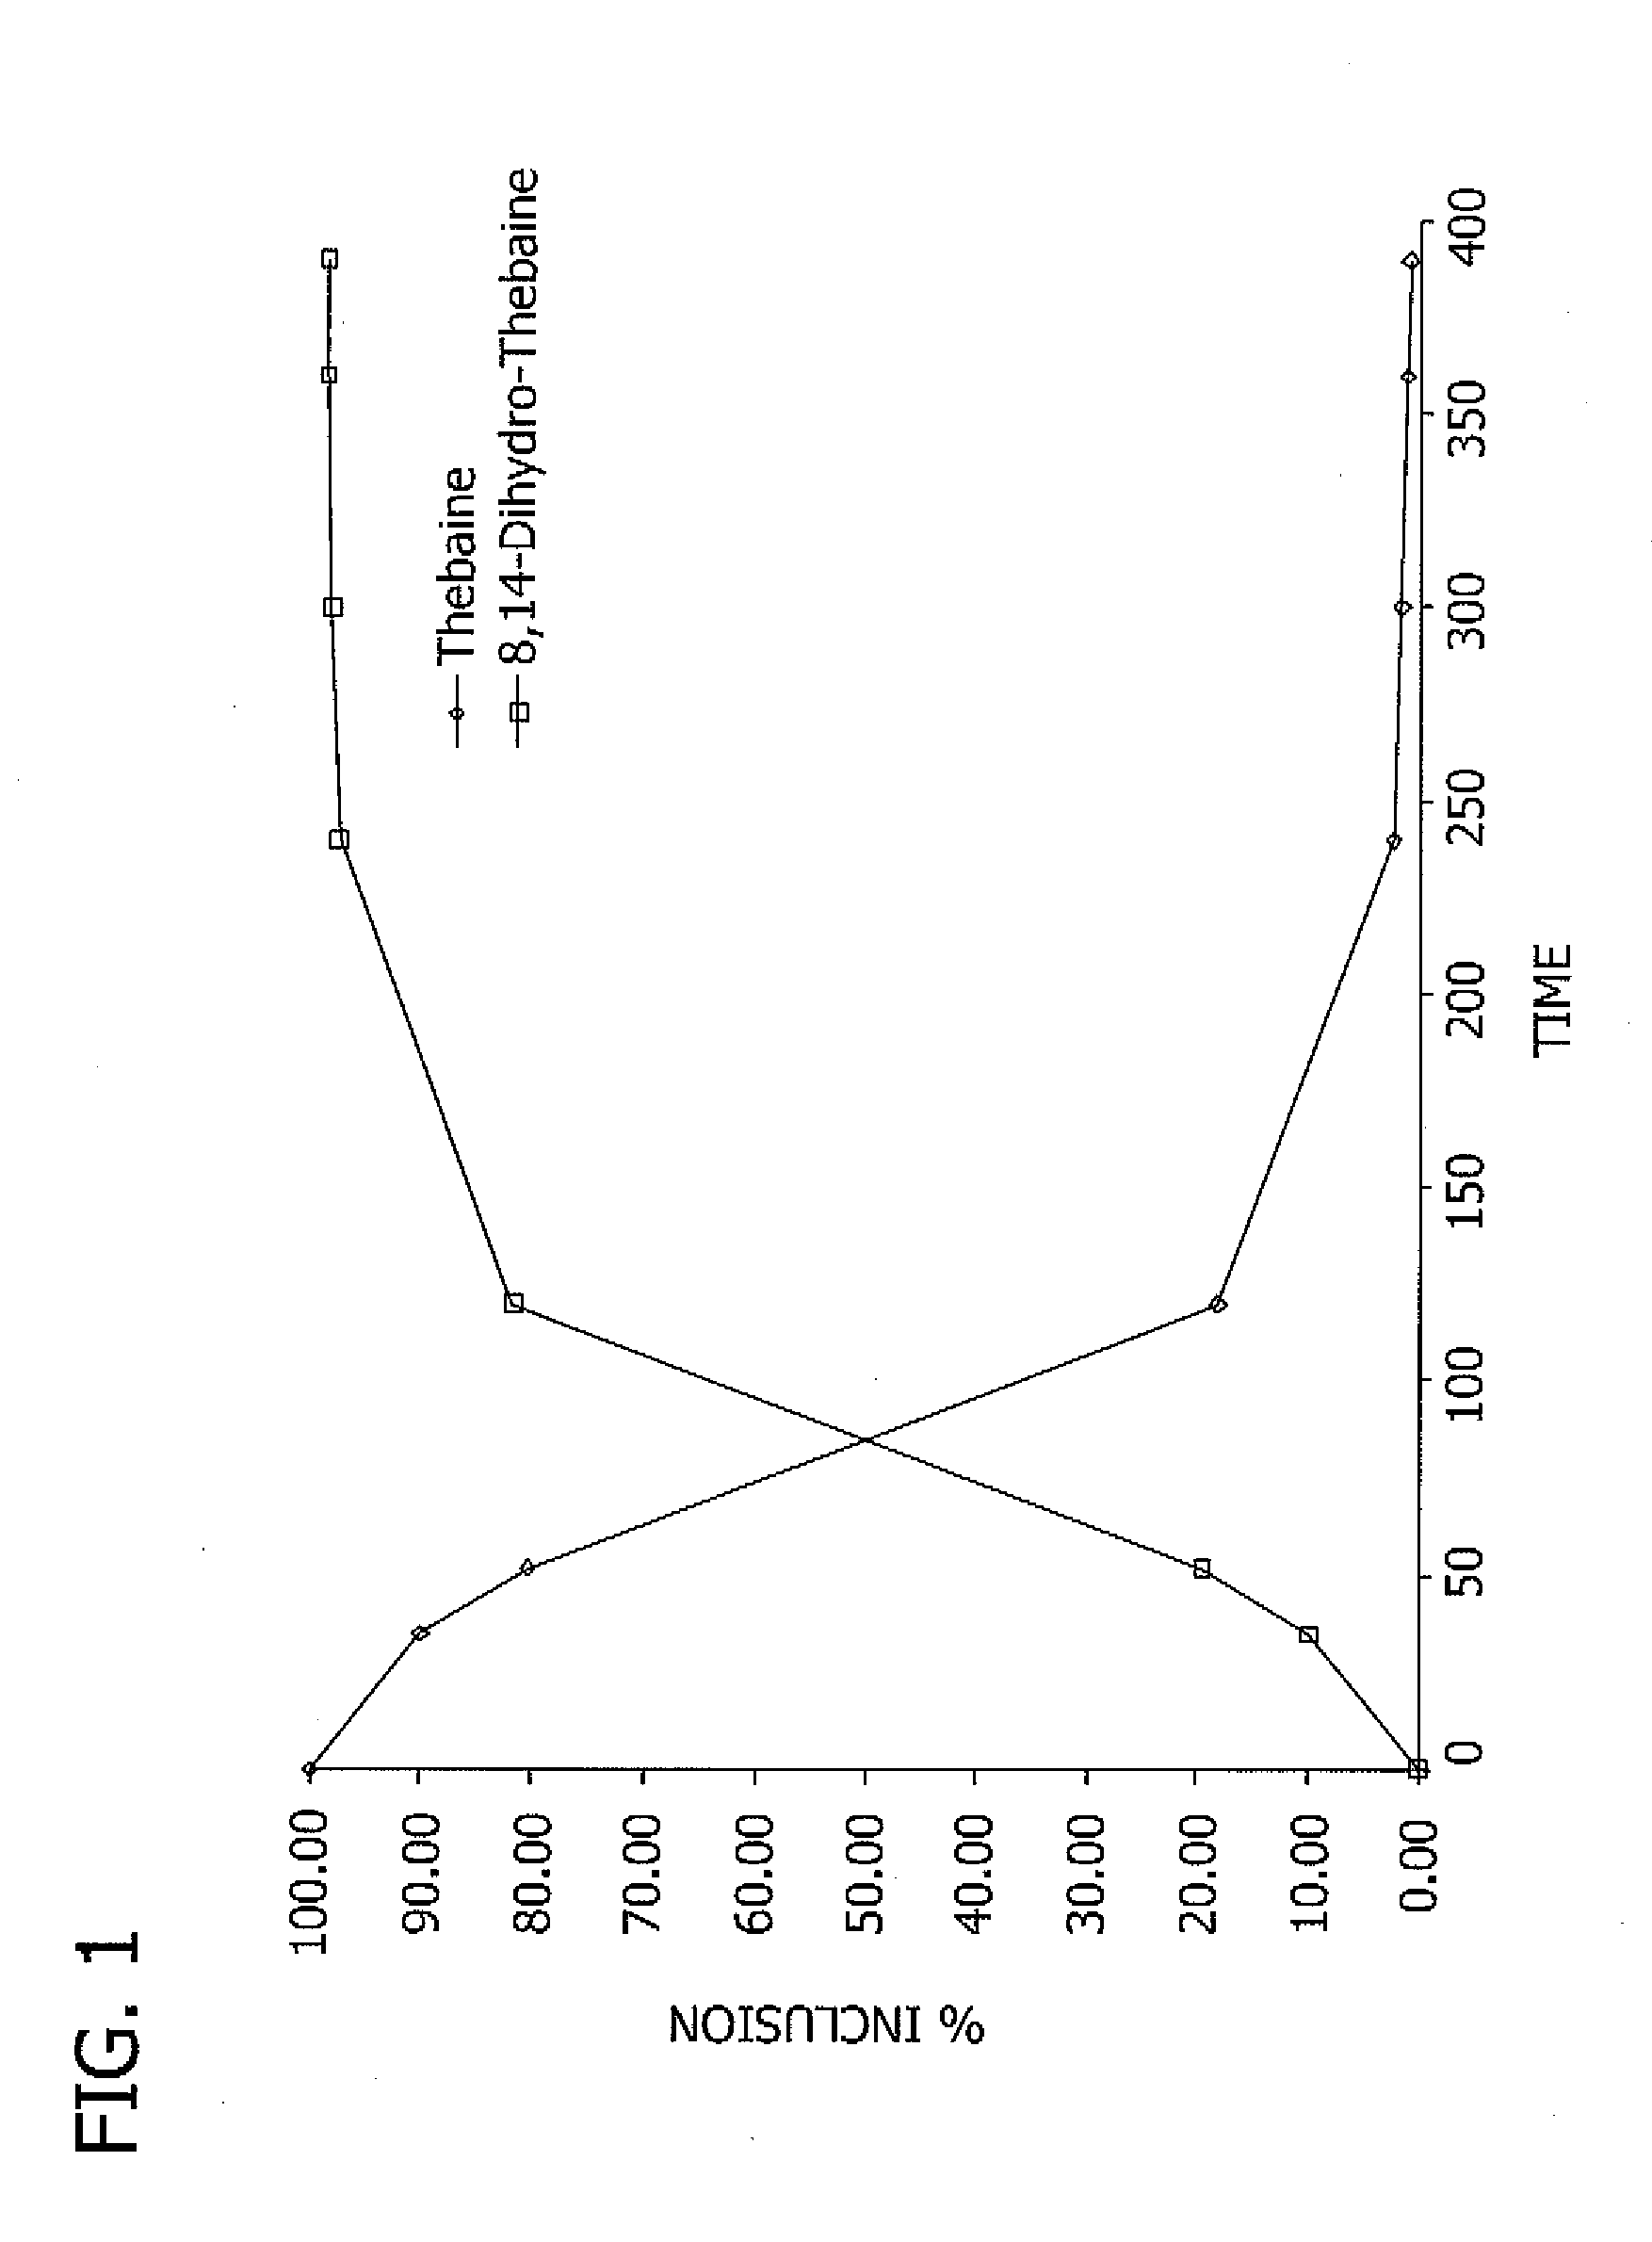 Methods for Producing Hydrocodone, Hydromorphone or a Derivative Thereof